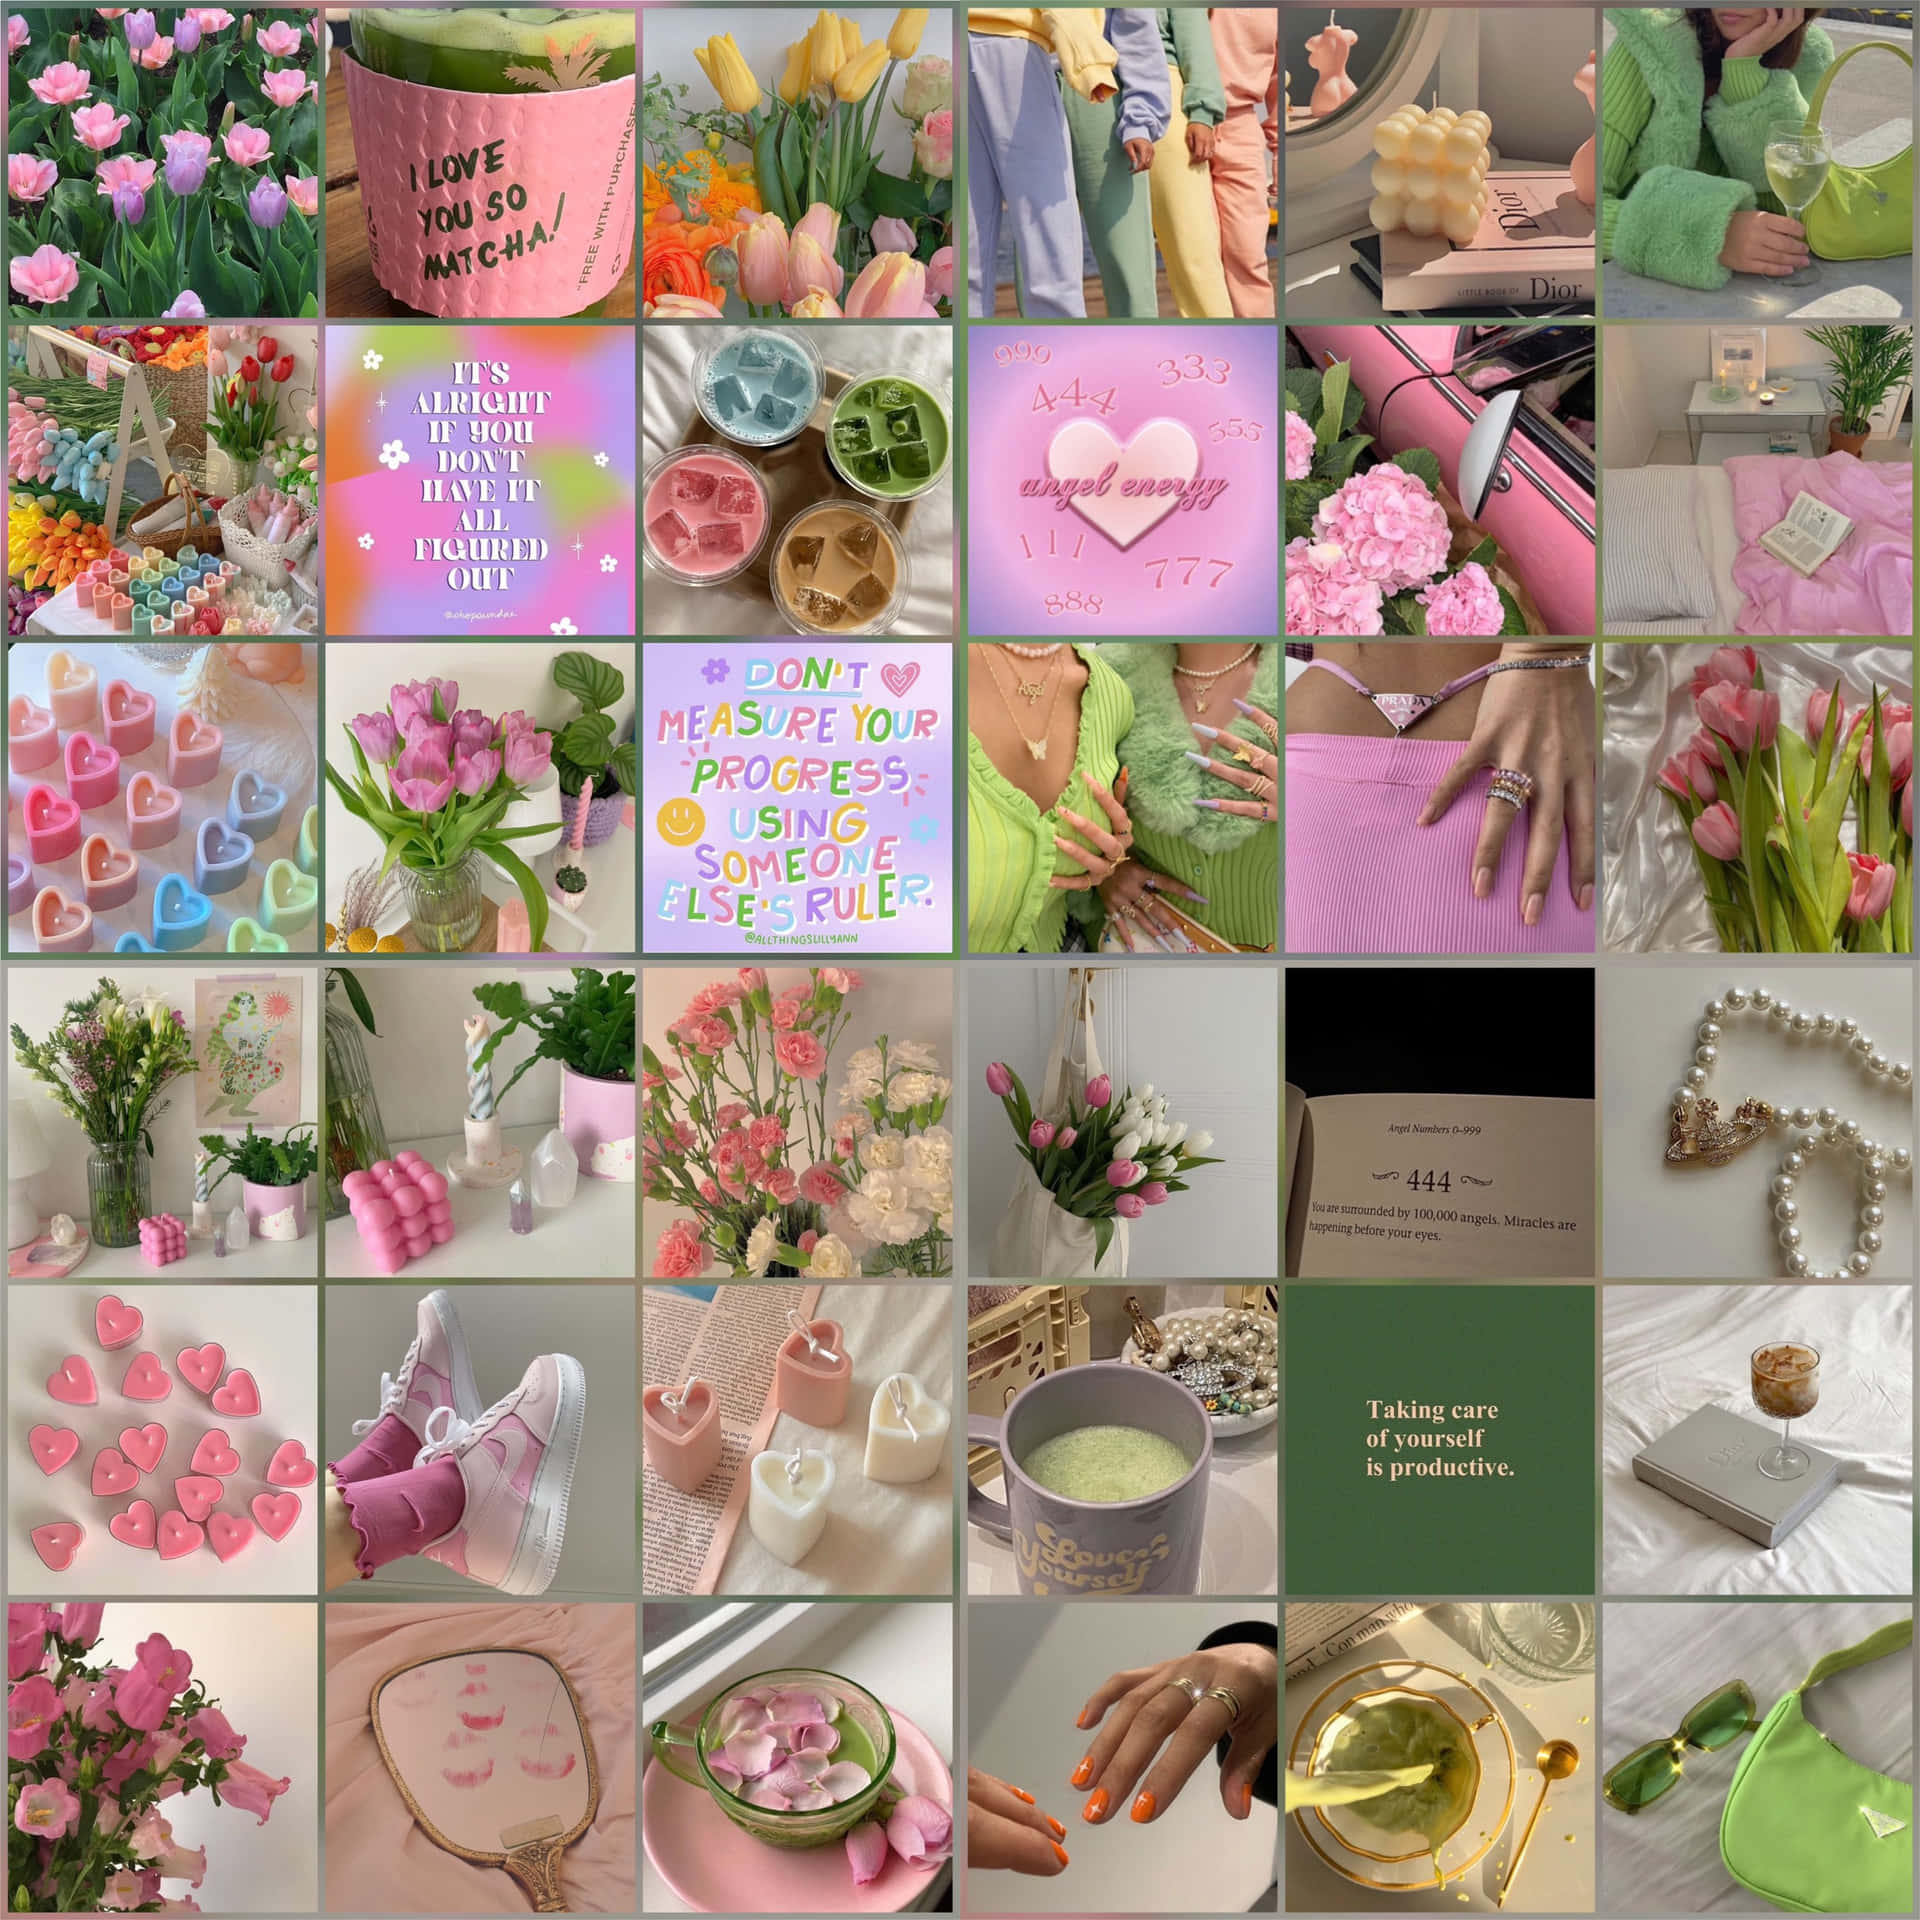 A Collage Of Pictures Of Flowers And Other Items